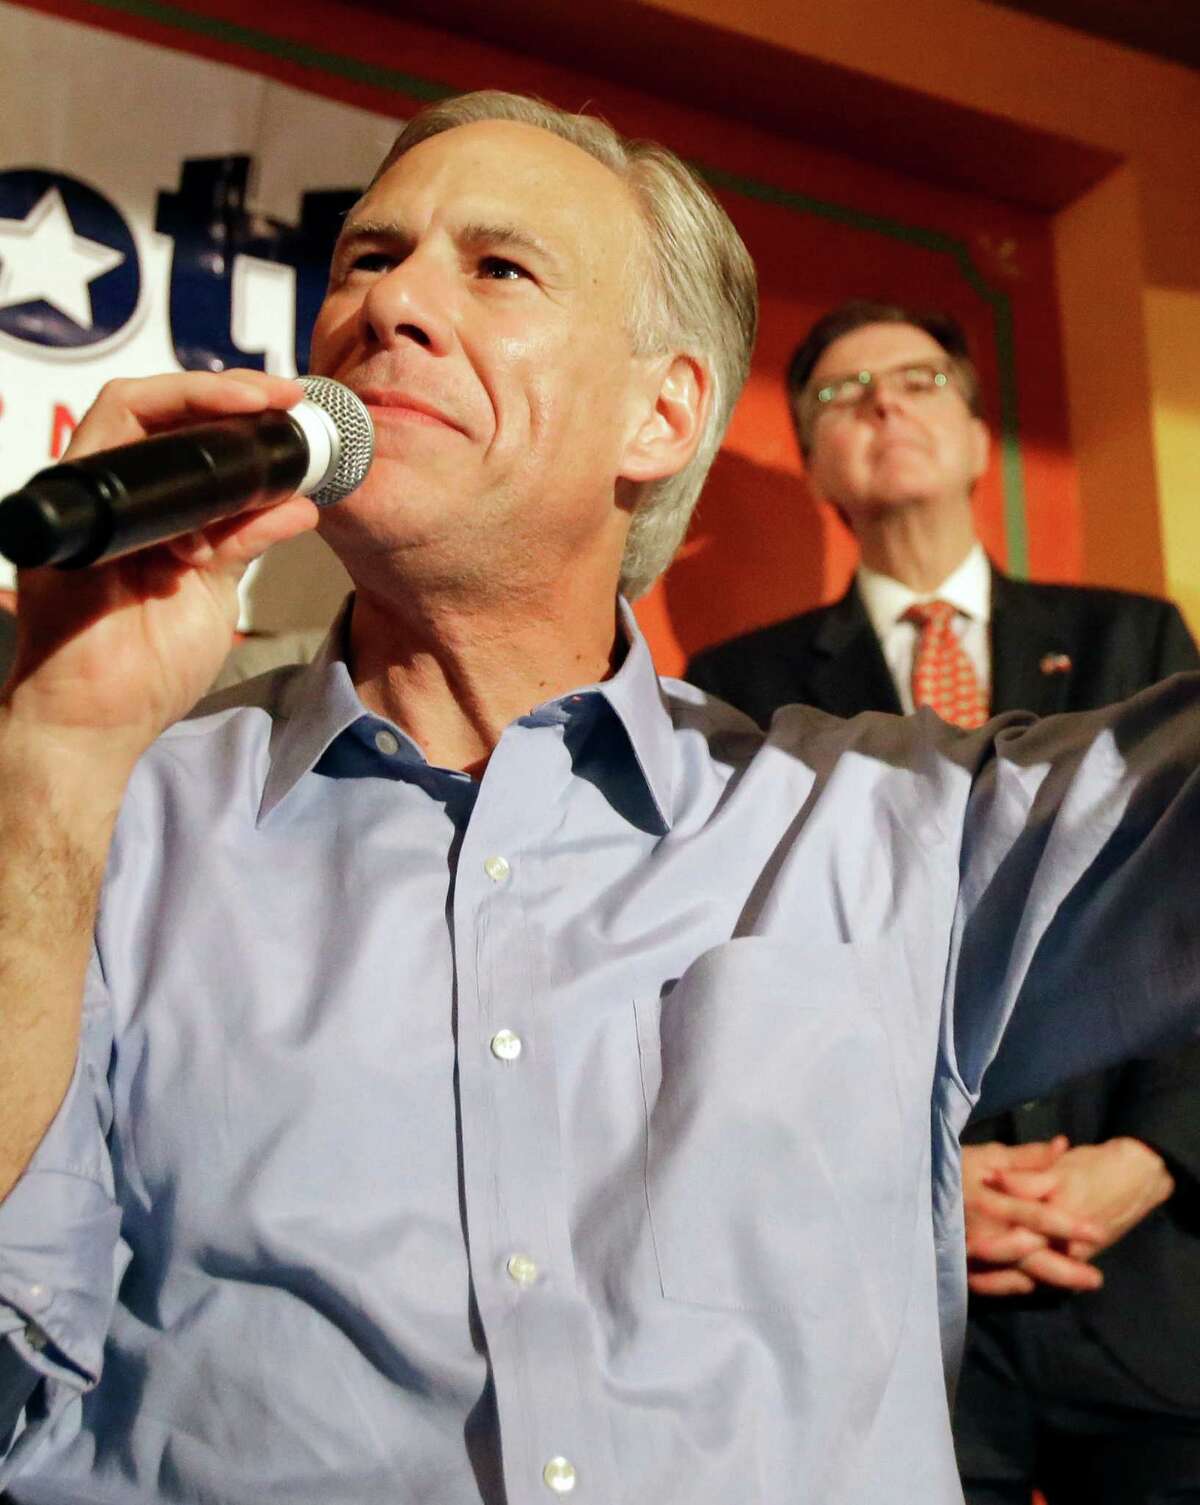 The biggest watching game in Texas next year: How will a Gov. Greg Abbott and Lt. Gov. Dan Patrick interact. Abbott speaks as Patrick, right, looks over his shoulder at a campaign event recently.